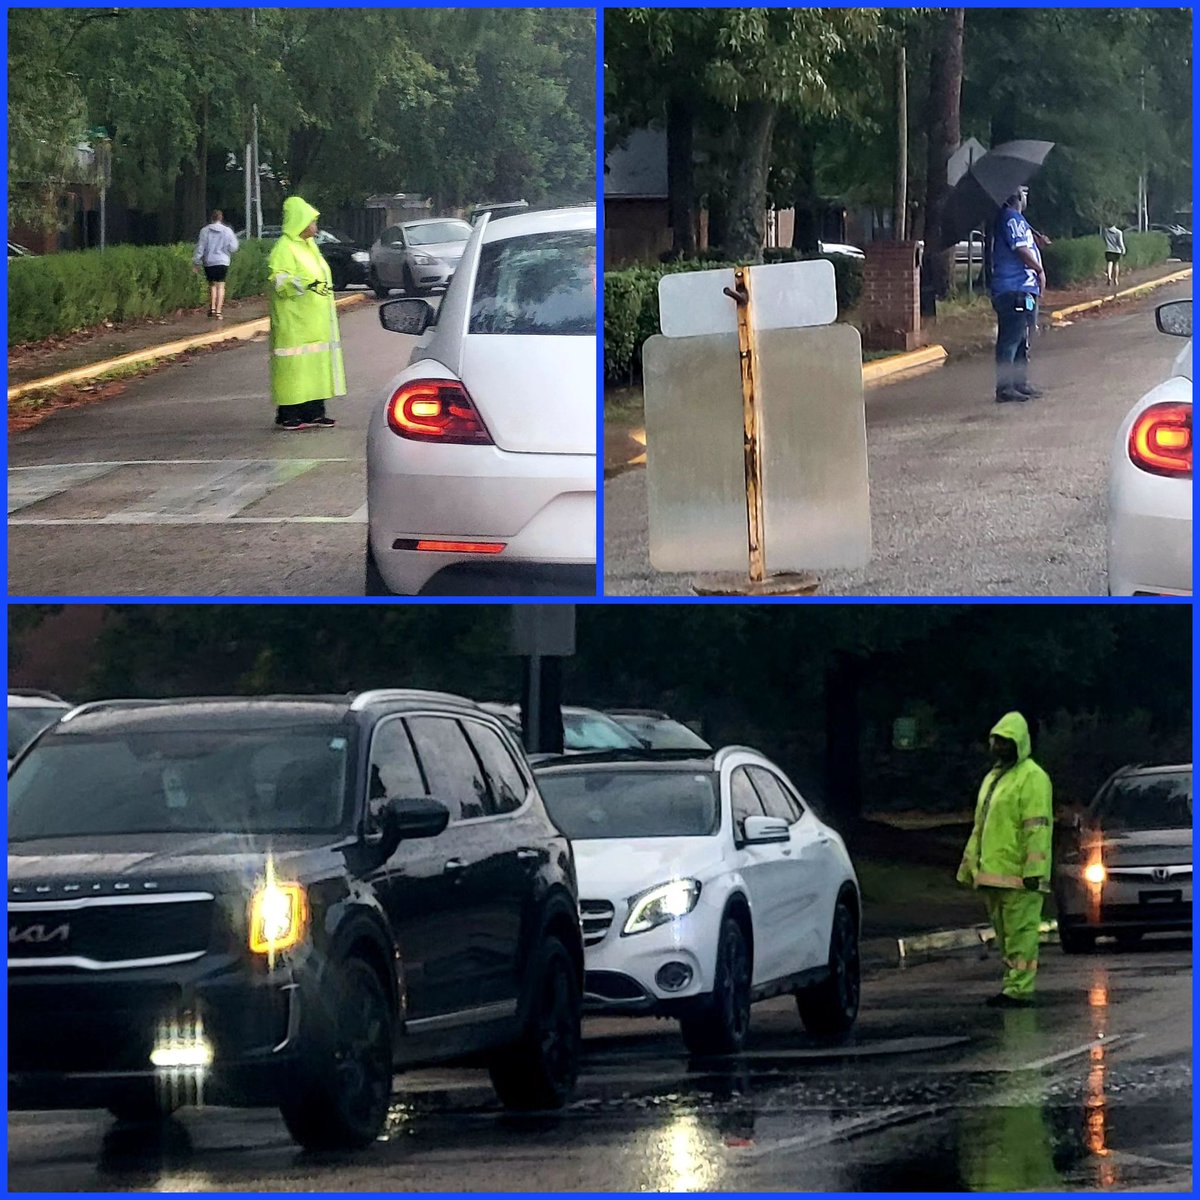 Big Thank You to our Crossing Guards and Staff helping direct school traffic! Rain or shine they are helping to keep our children safe! #MPSRising #crossingguards #appreciationpost